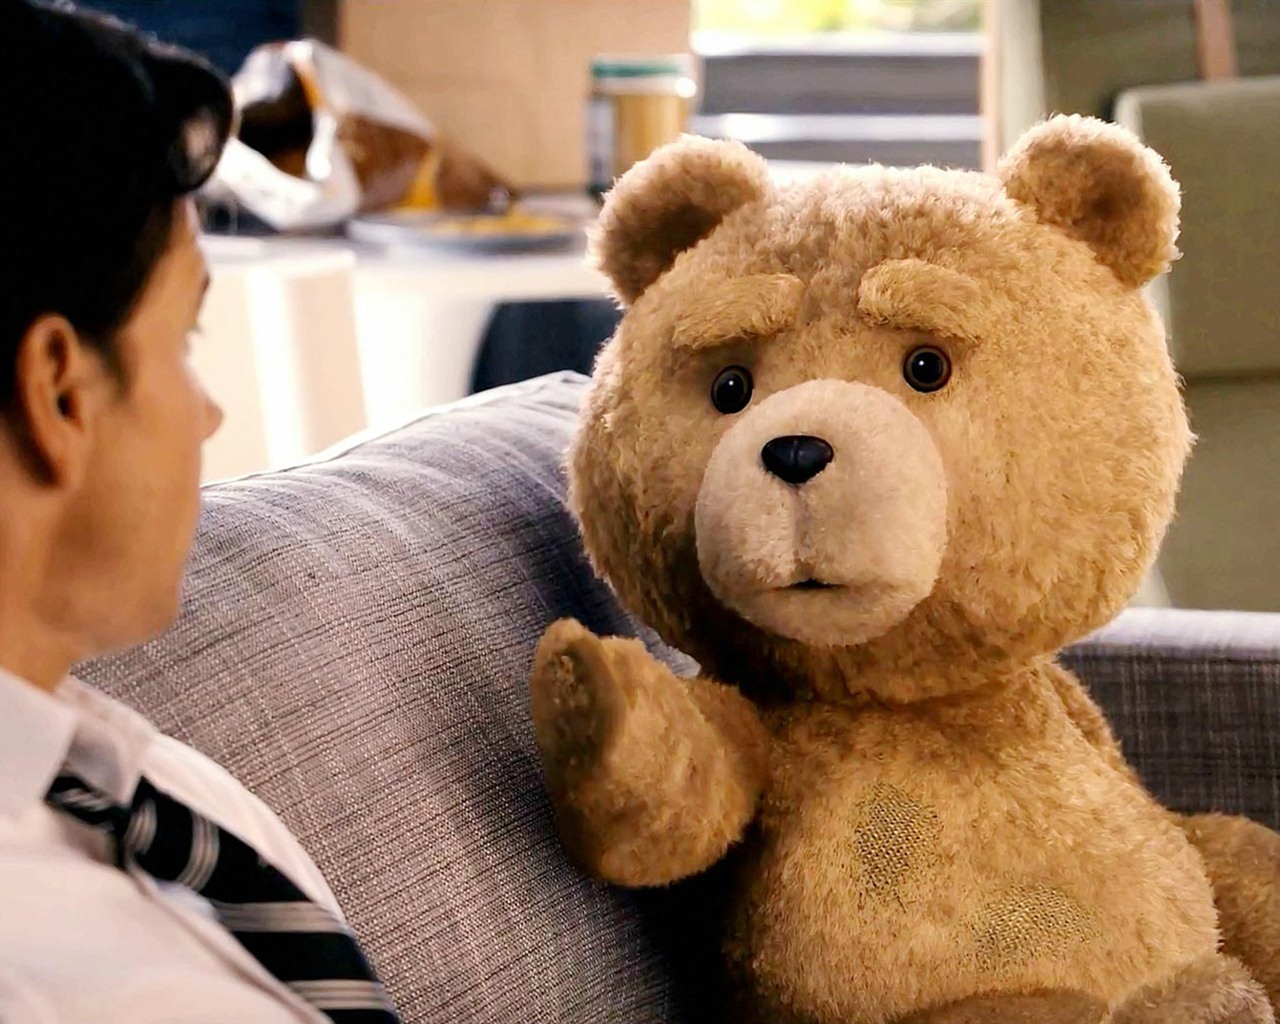 Ted 2012 HD movie wallpapers #8 - 1280x1024